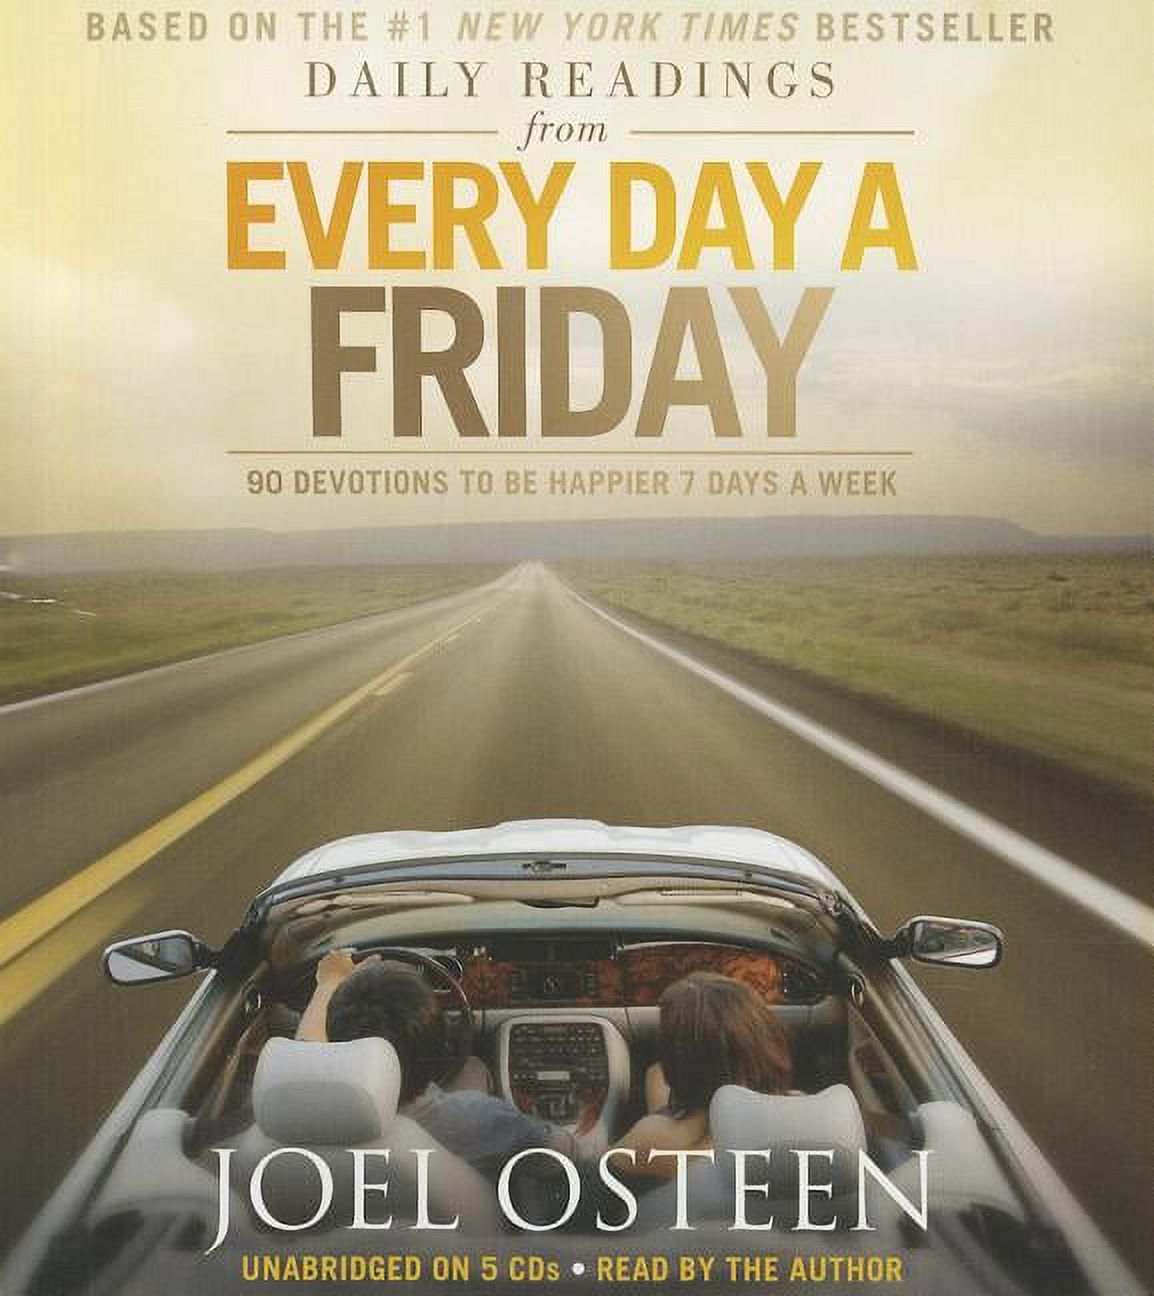 Daily Readings from Every Day a Friday : 90 Devotions to Be Happier 7 Days a Week (CD-Audio) - image 1 of 1